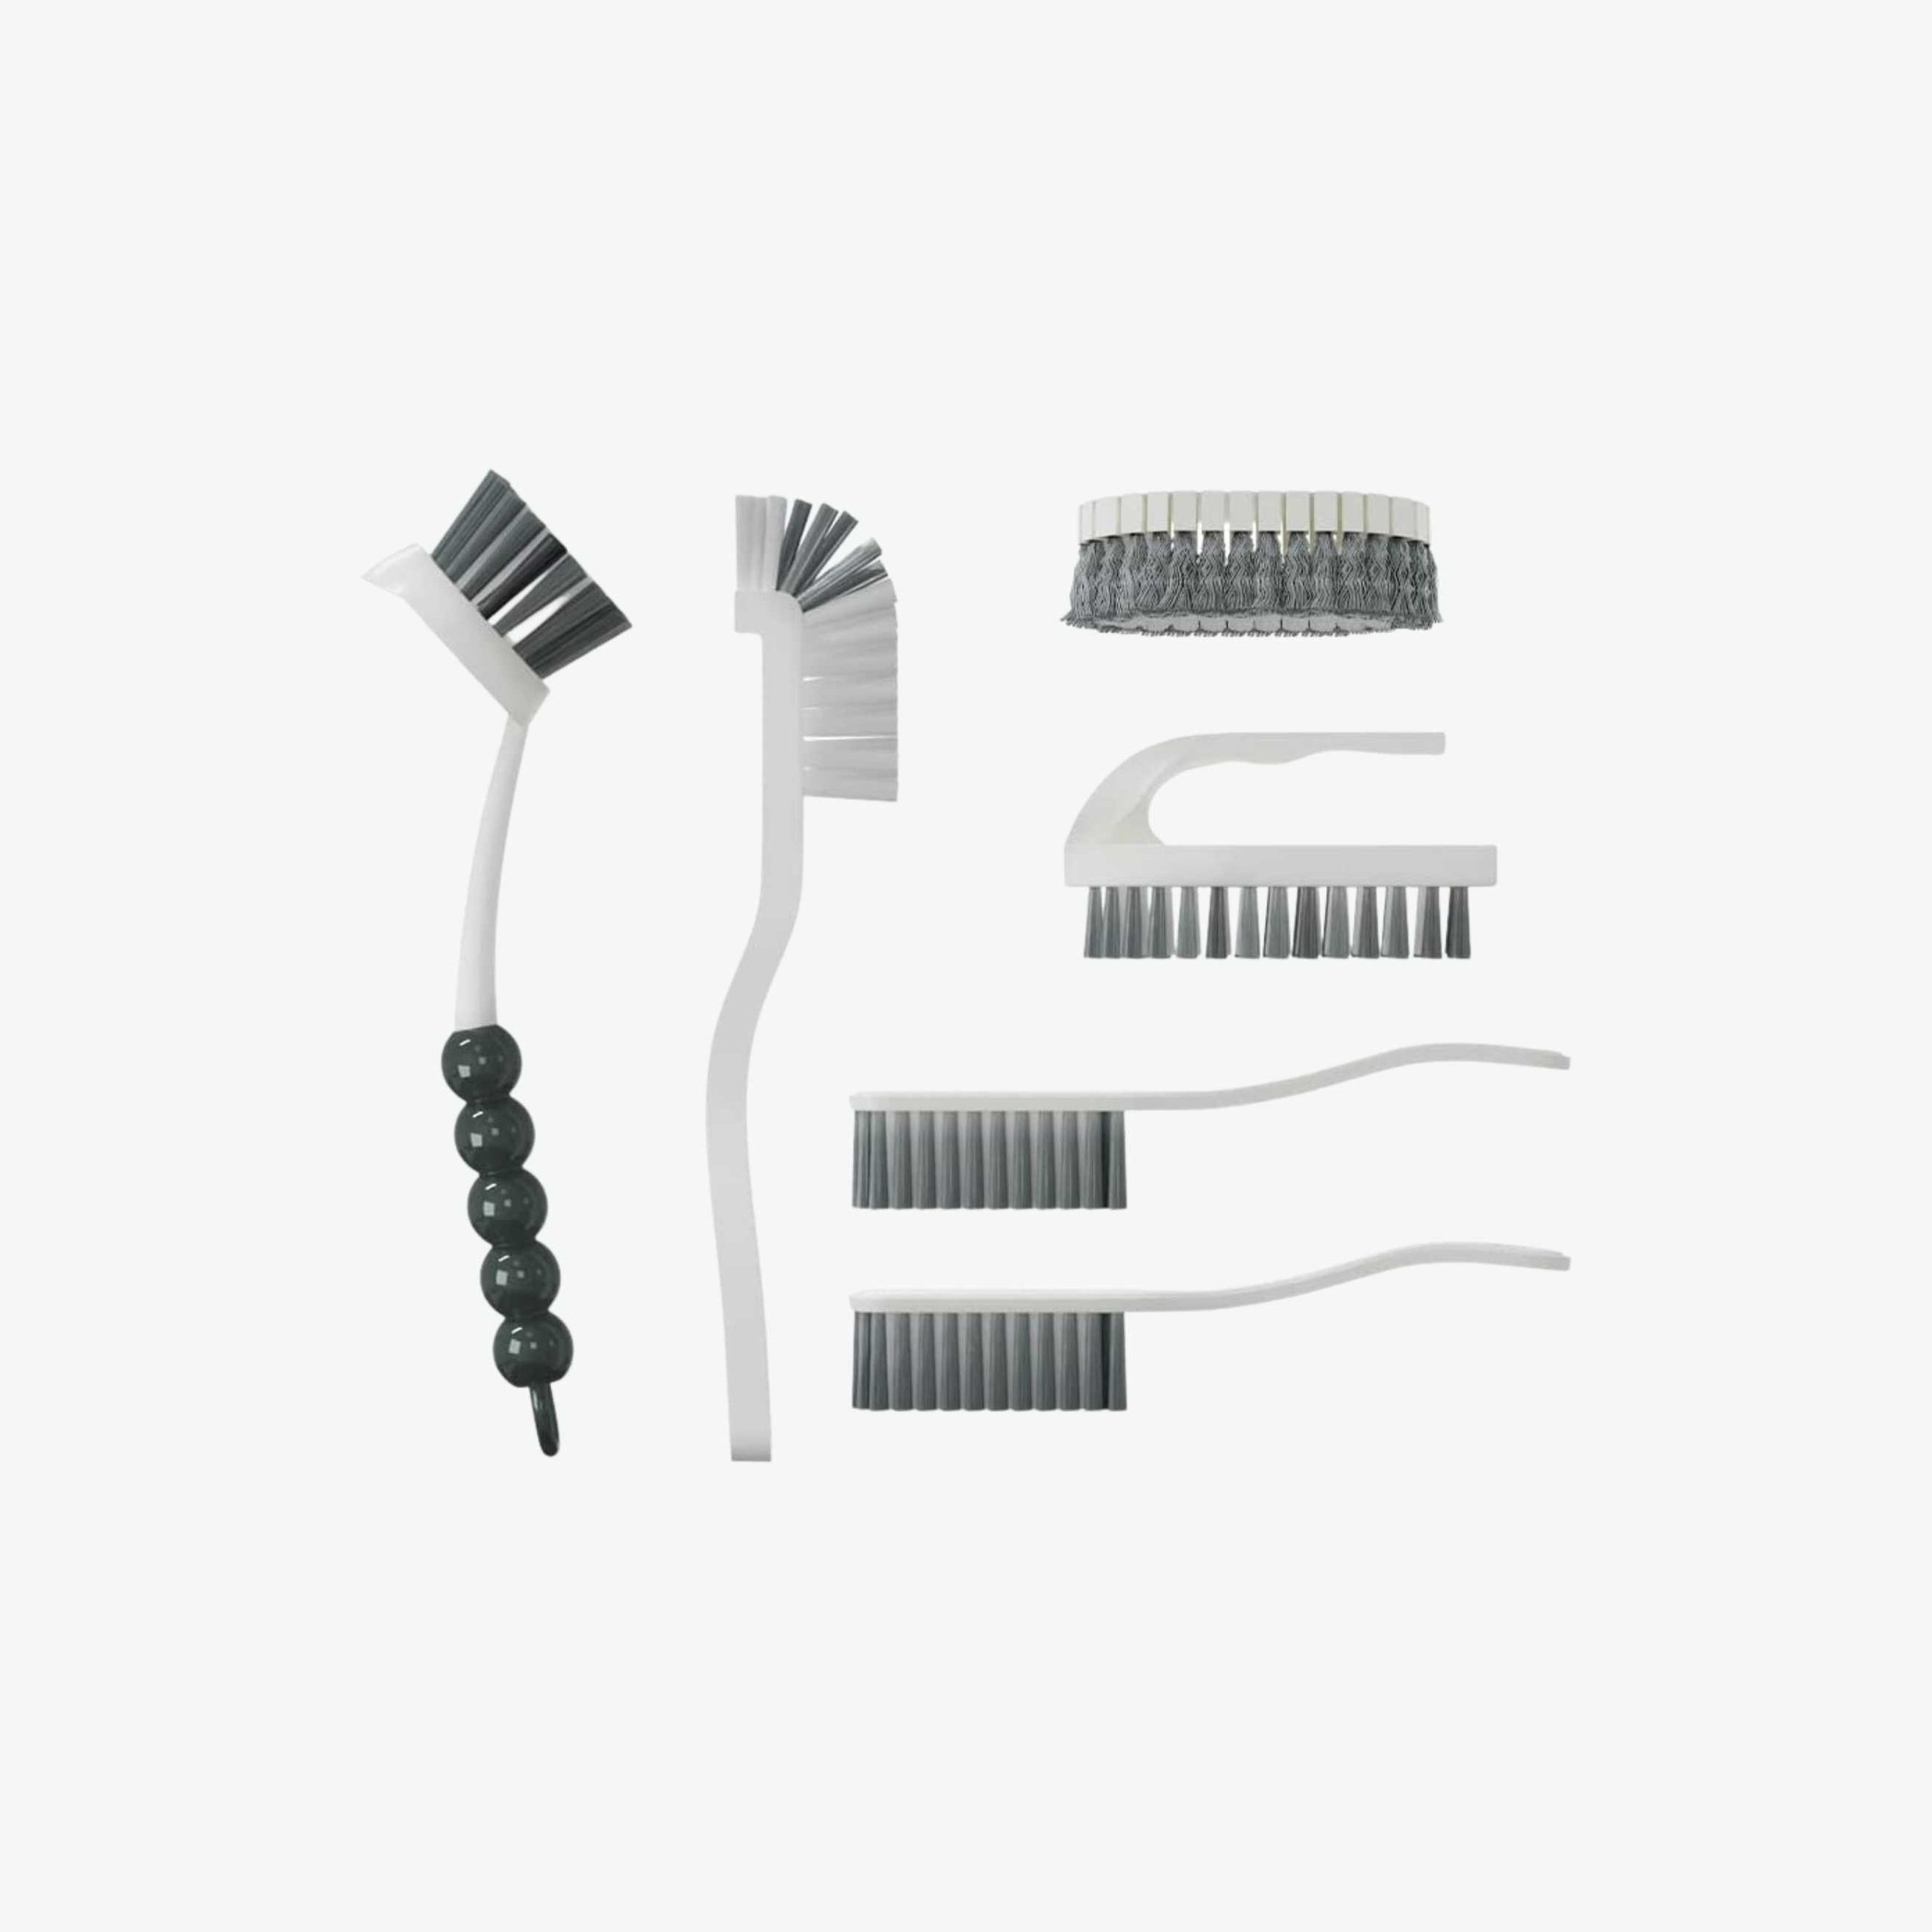 Six Grey and Weight Variety Cleaning Brushes.jpg